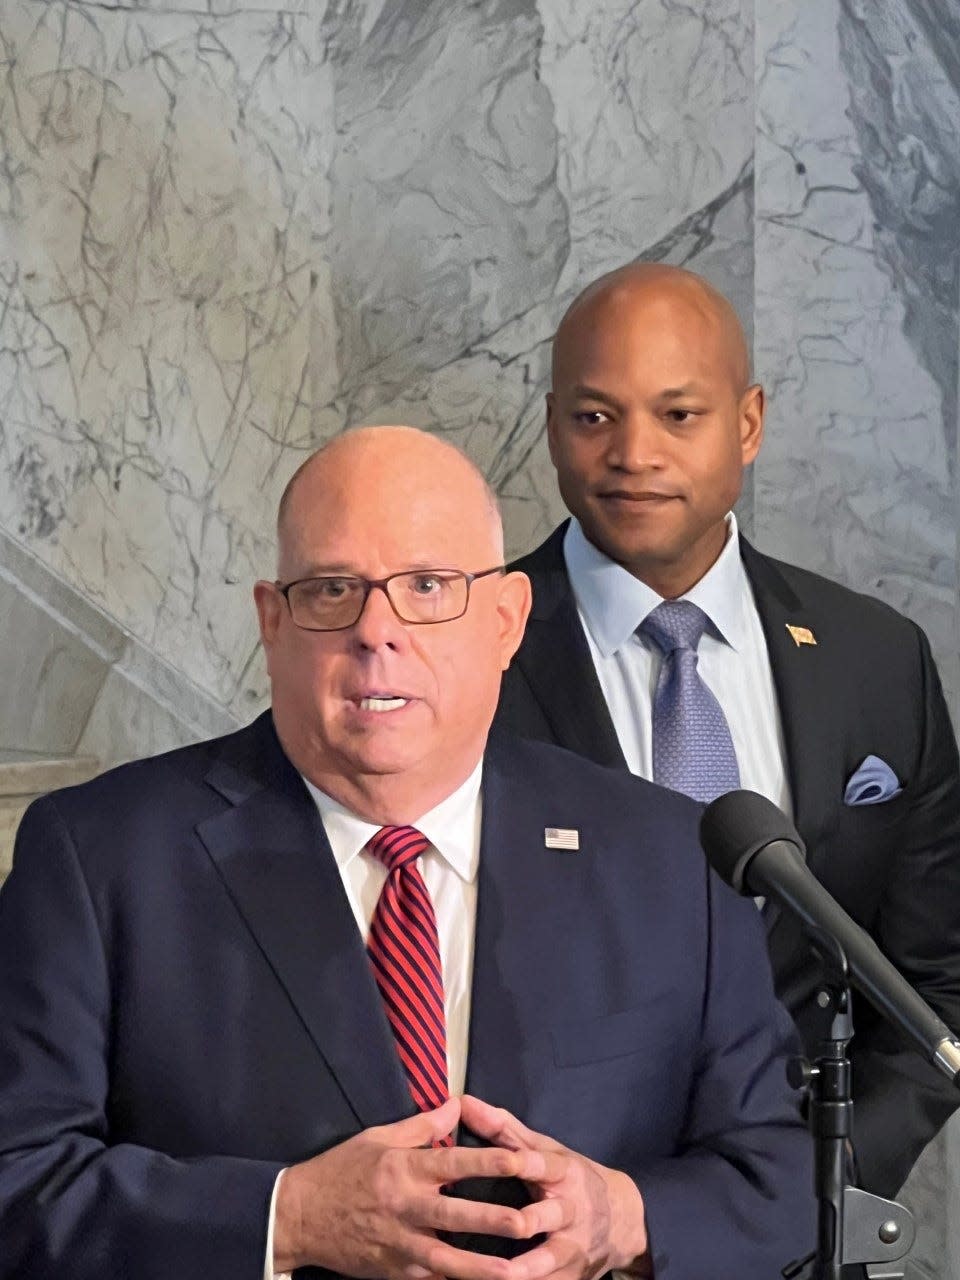 In this file photo, then-Maryland Gov. Larry Hogan, left, speaks to reporters at the State House in Annapolis on Nov. 10, 2022, as then-Governor-Elect Wes Moore, right, looks on.